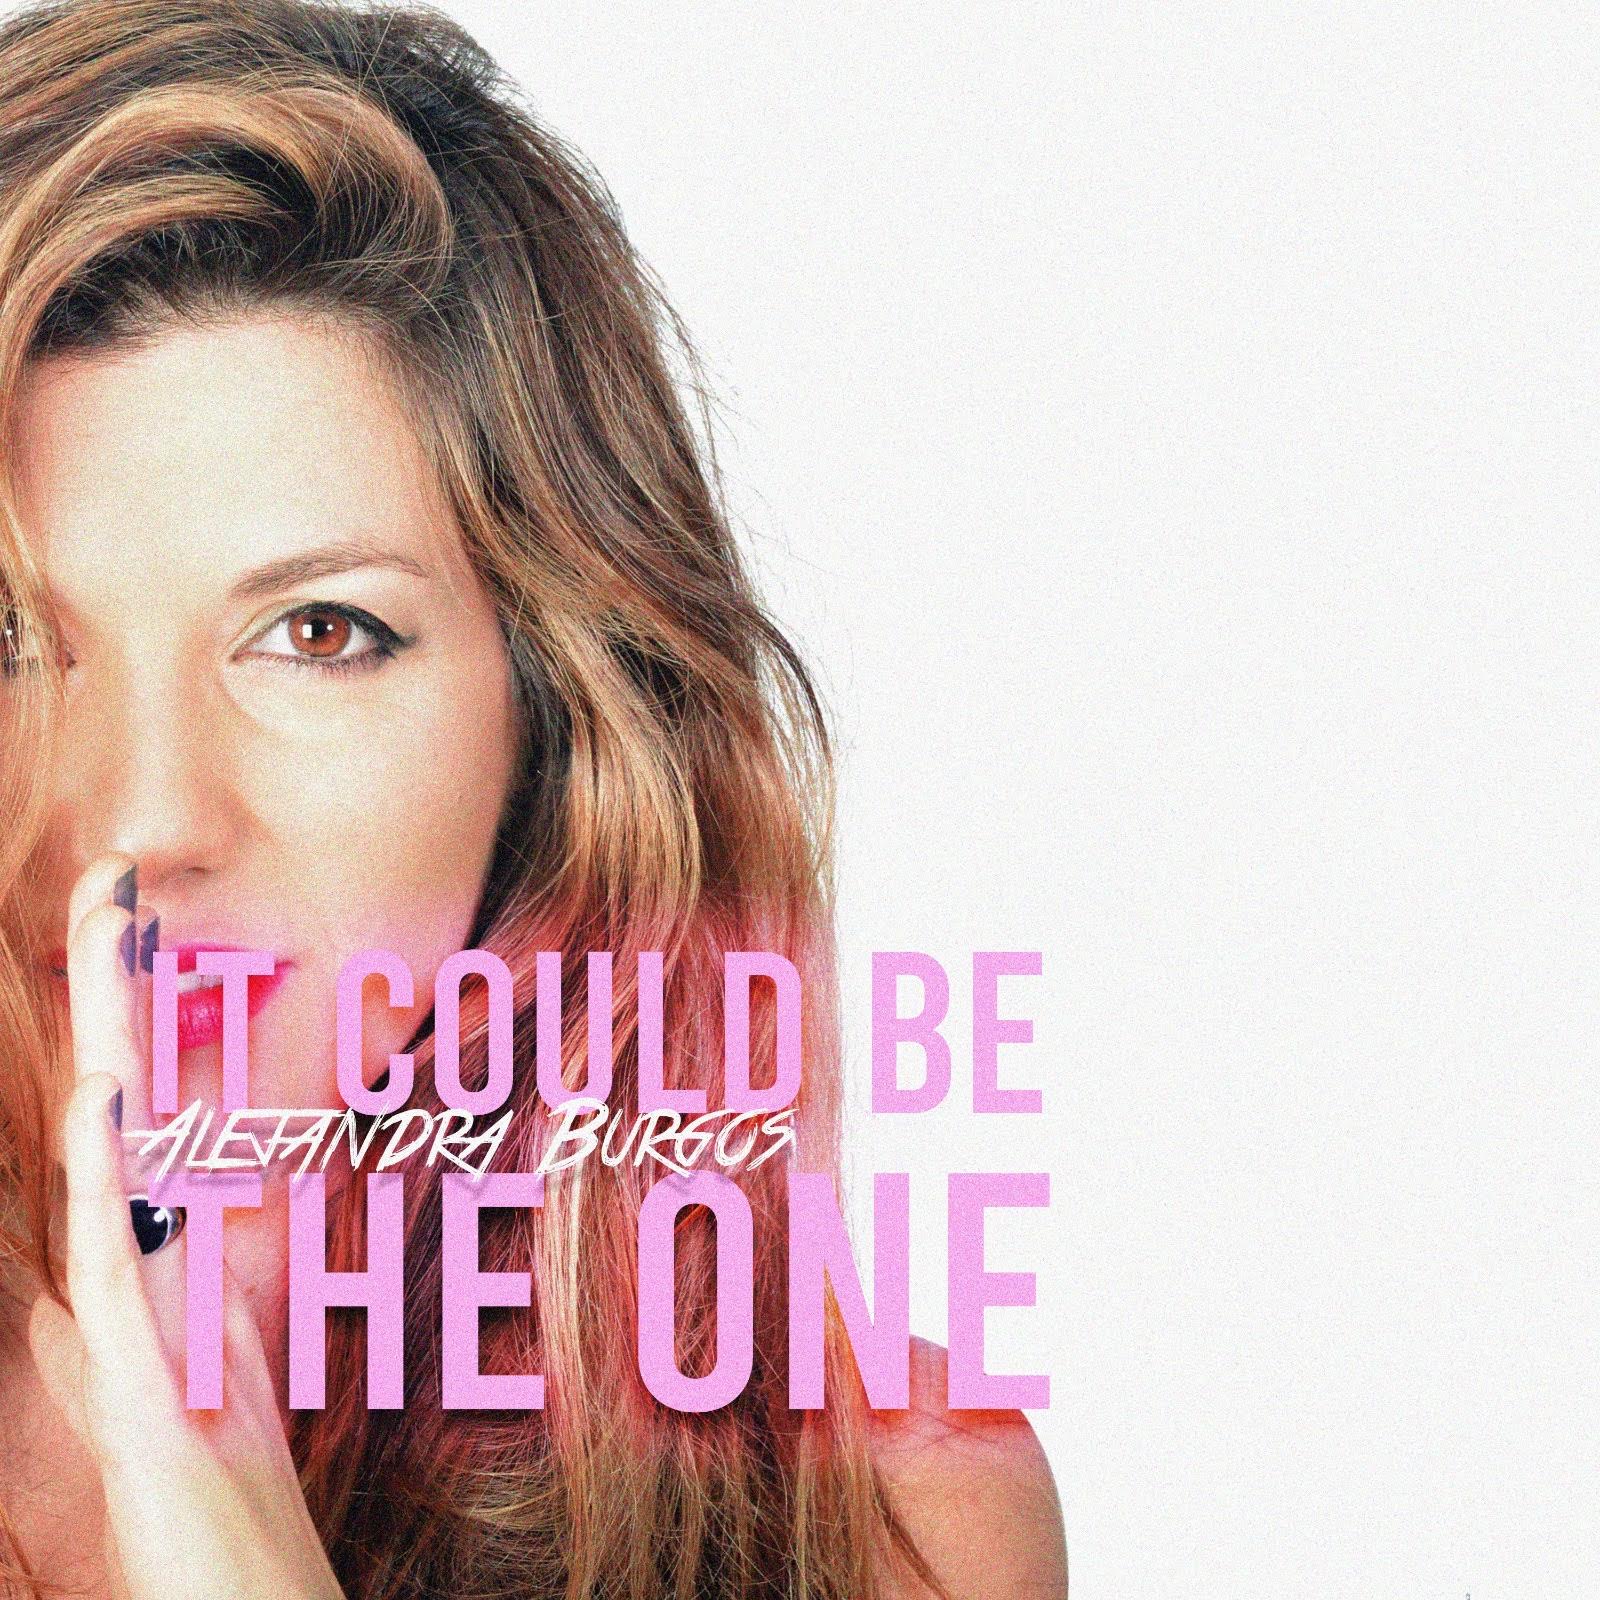 Alejandra Burgos – It could be the one – NEW VIDEO LYRICS OUT!